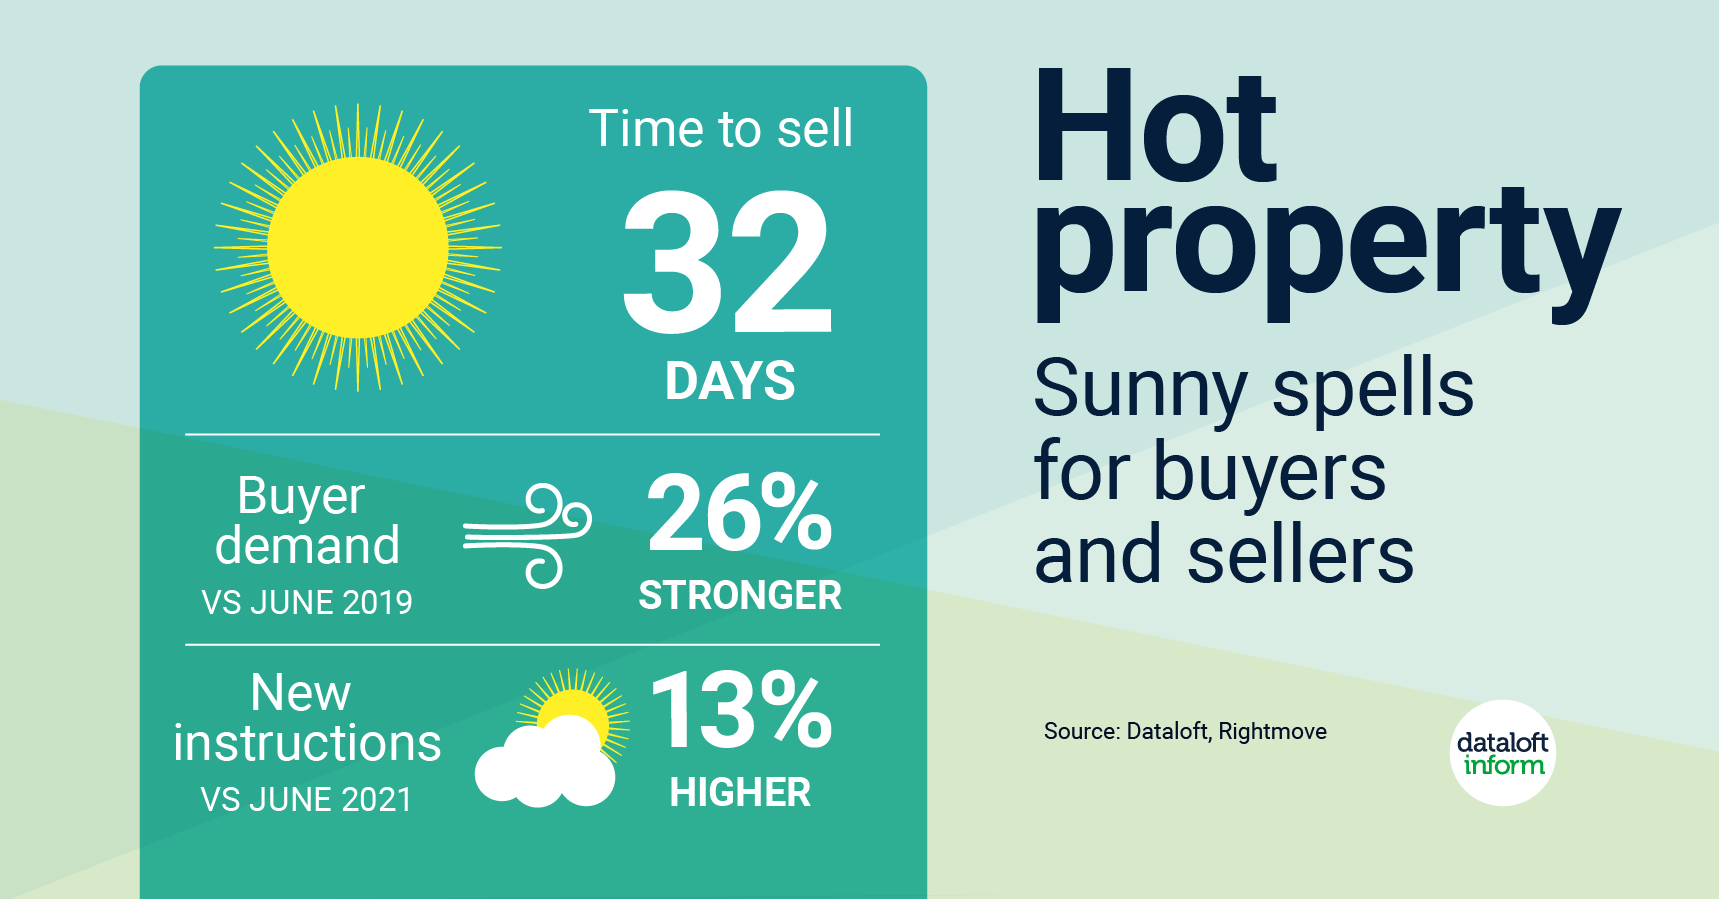 Sunny spell for buyers and sellers